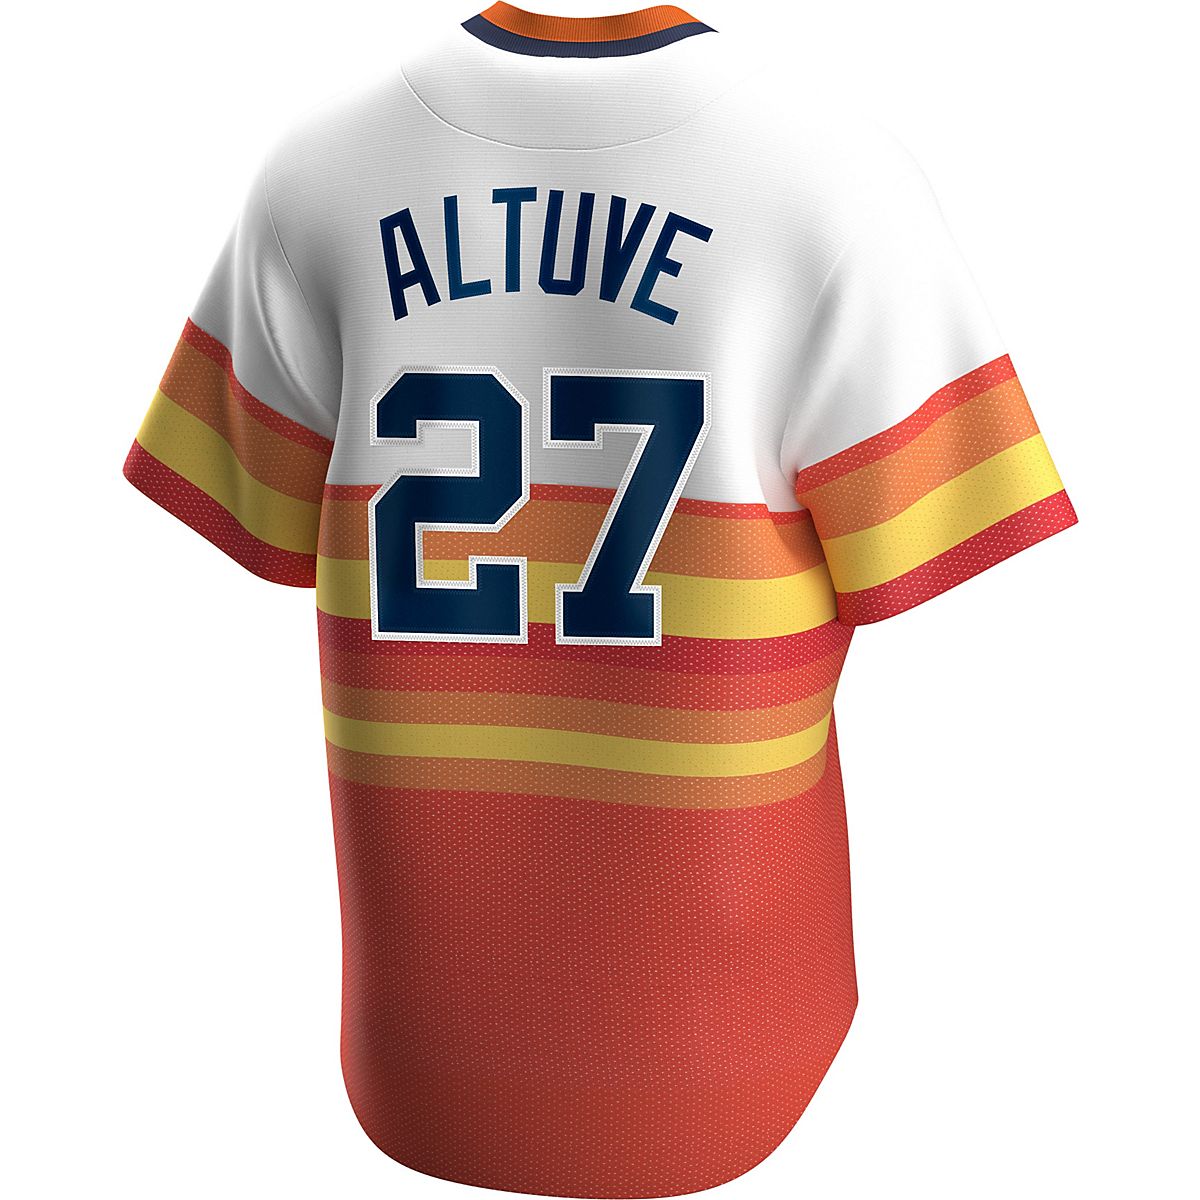 Nike Men's Altuve Houston Astros Official Player Cooperstown Jersey